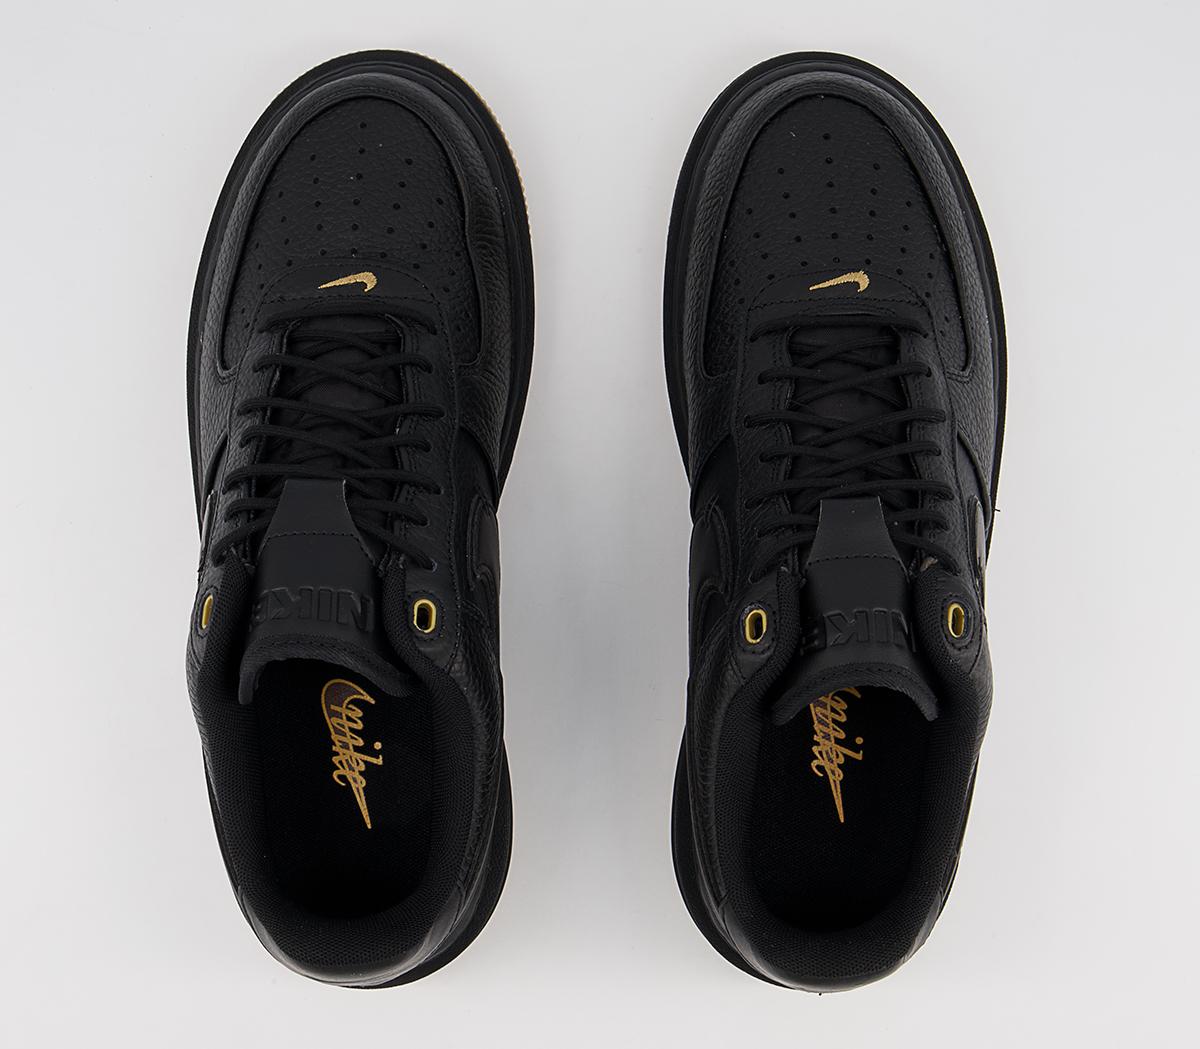 Nike Air Force 1 Luxe Trainers Black Black Bucktan Gum Yellow - His ...